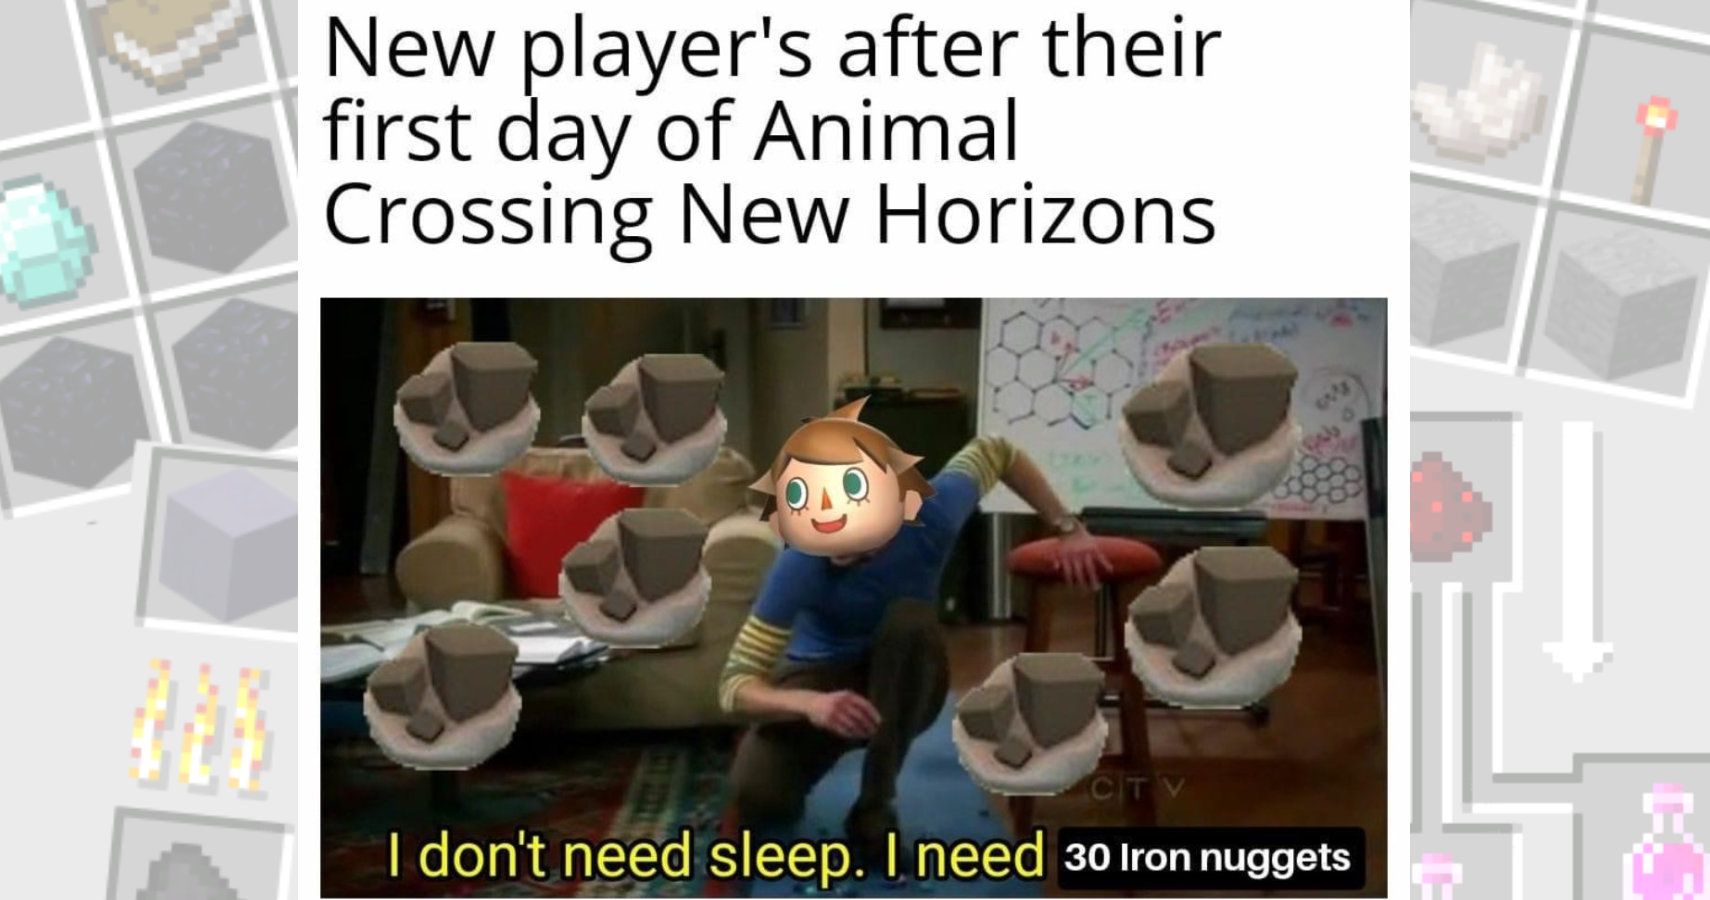 Text reads "new player's after their first day in animal crossing" Underneath is sheldon from TBBT surrounded by iron nuggets text reads "I don't need sleep, I need 30 Iron Nuggets."